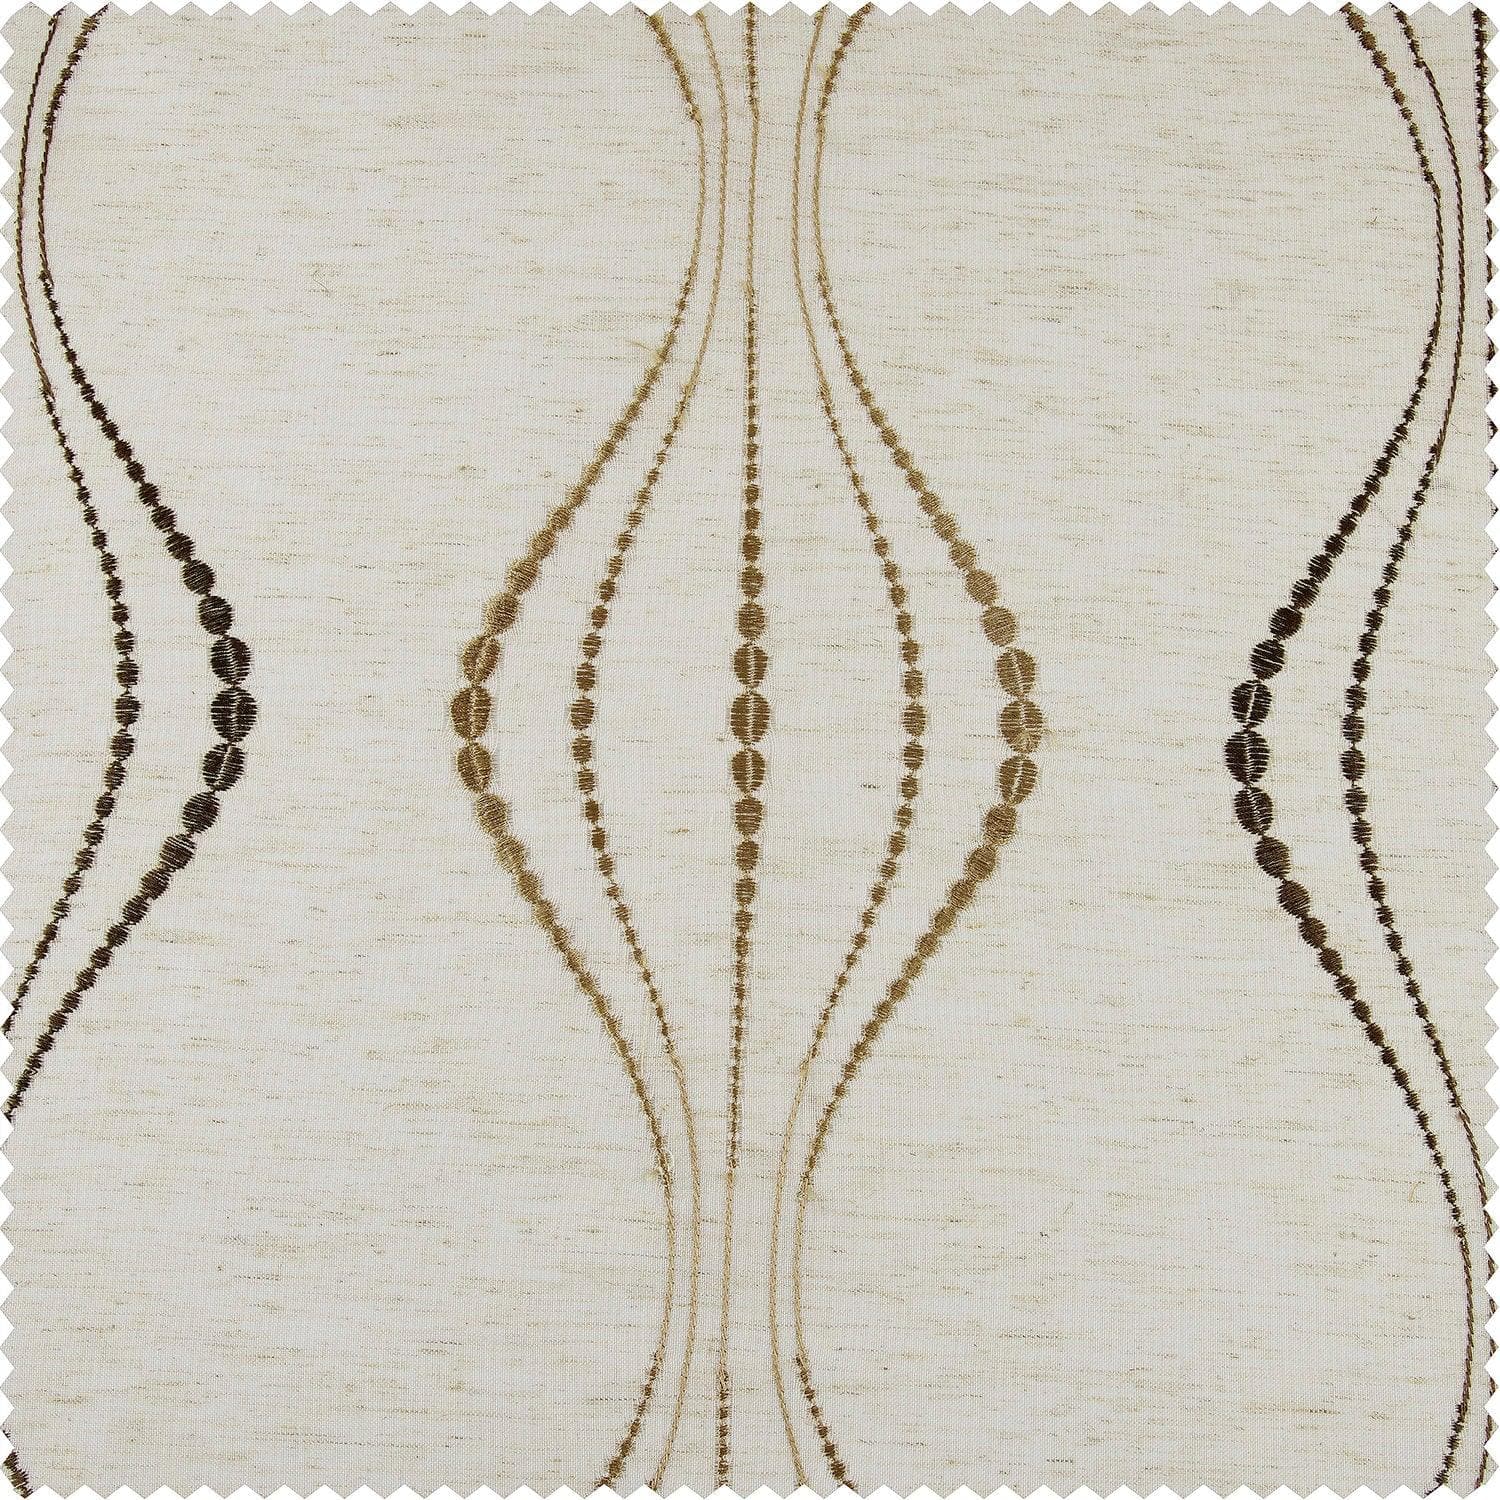 Suez Bronze Embroidered Patterned Faux Linen Sheer Curtain